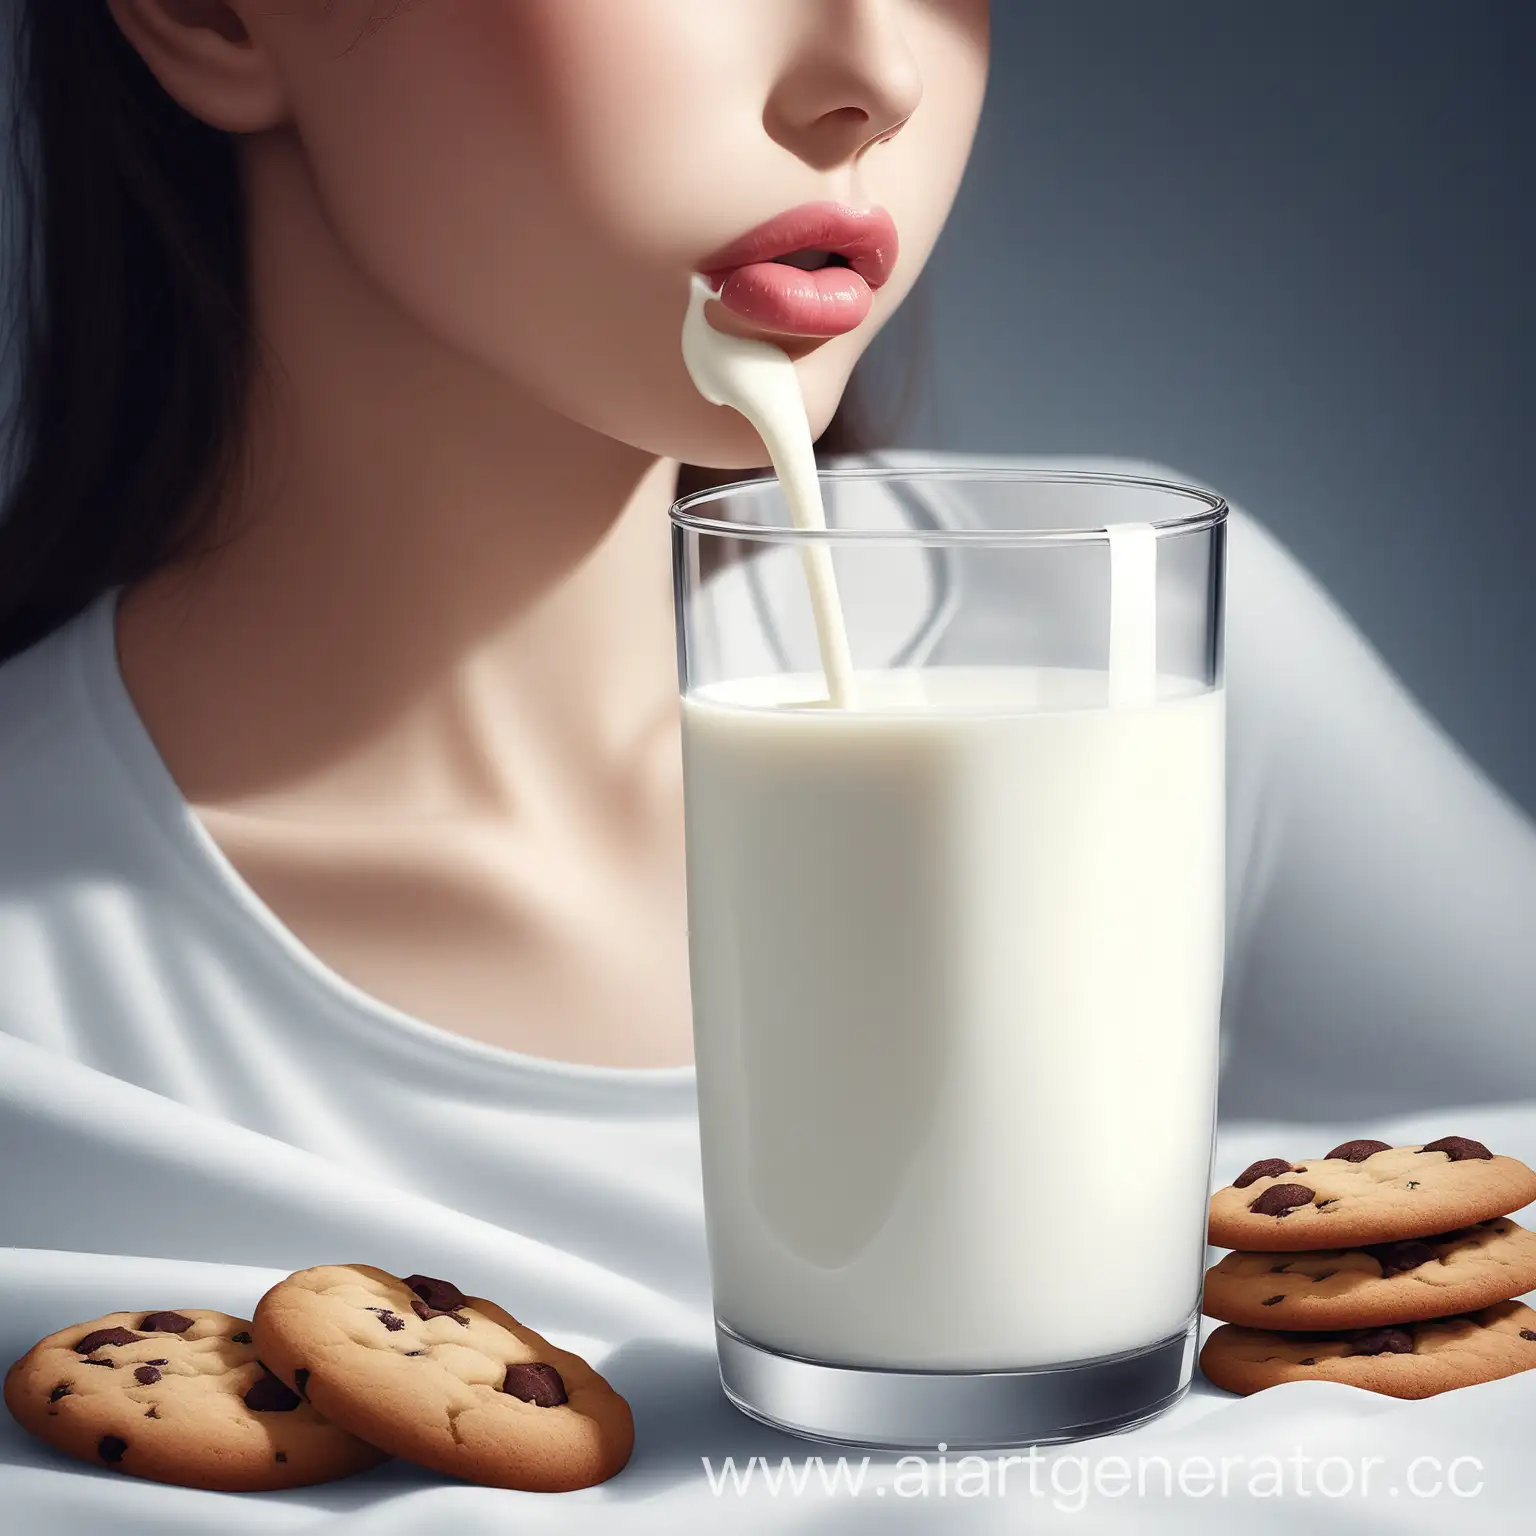 Cookie-Dipped-in-Milk-with-Kissable-Lips